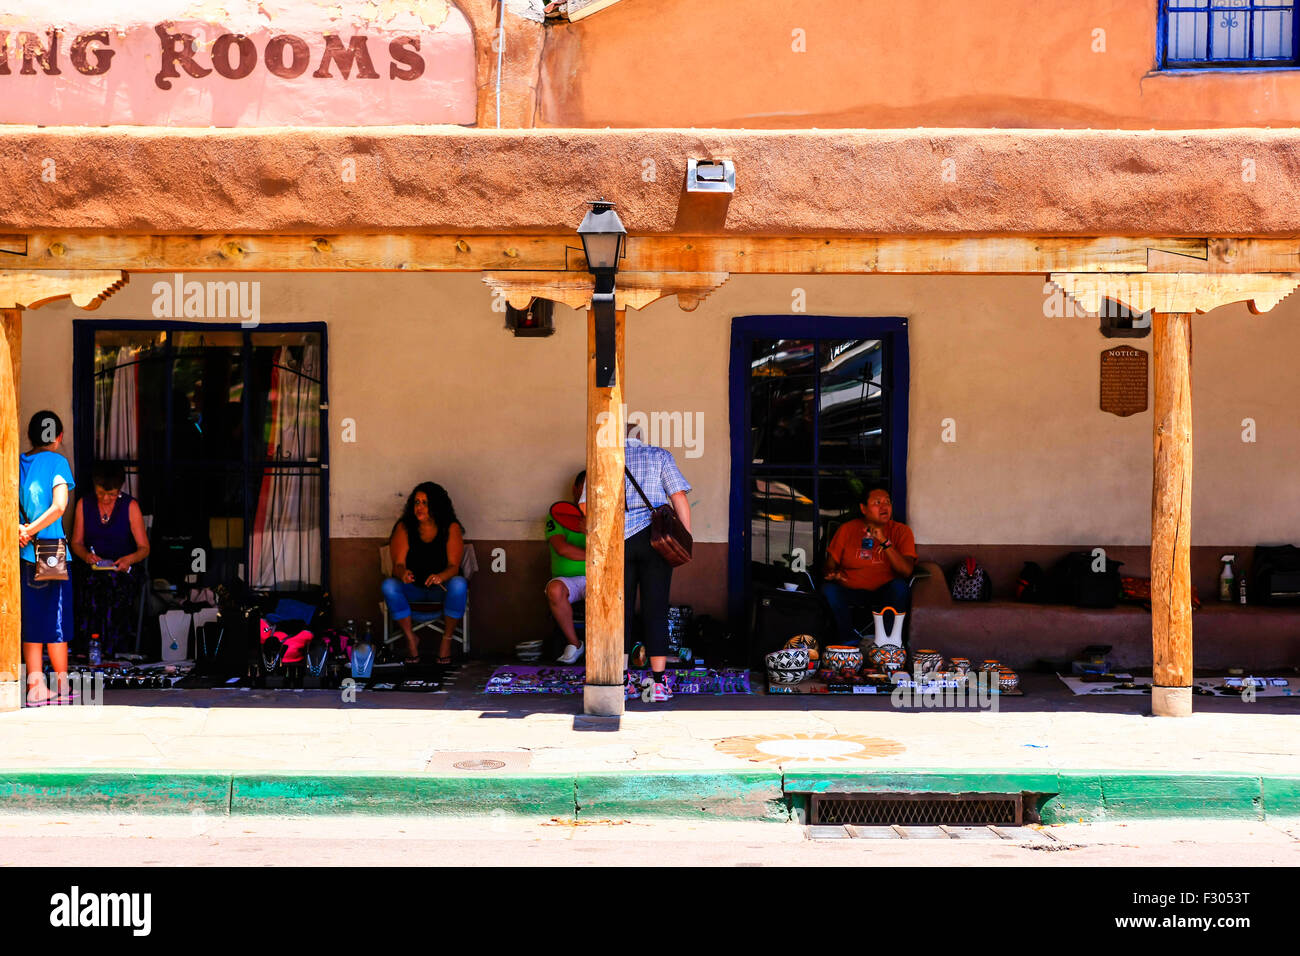 La Placita Dining Rooms overlooking the Old Town Plaza in Albuquerque, New Mexico Stock Photo